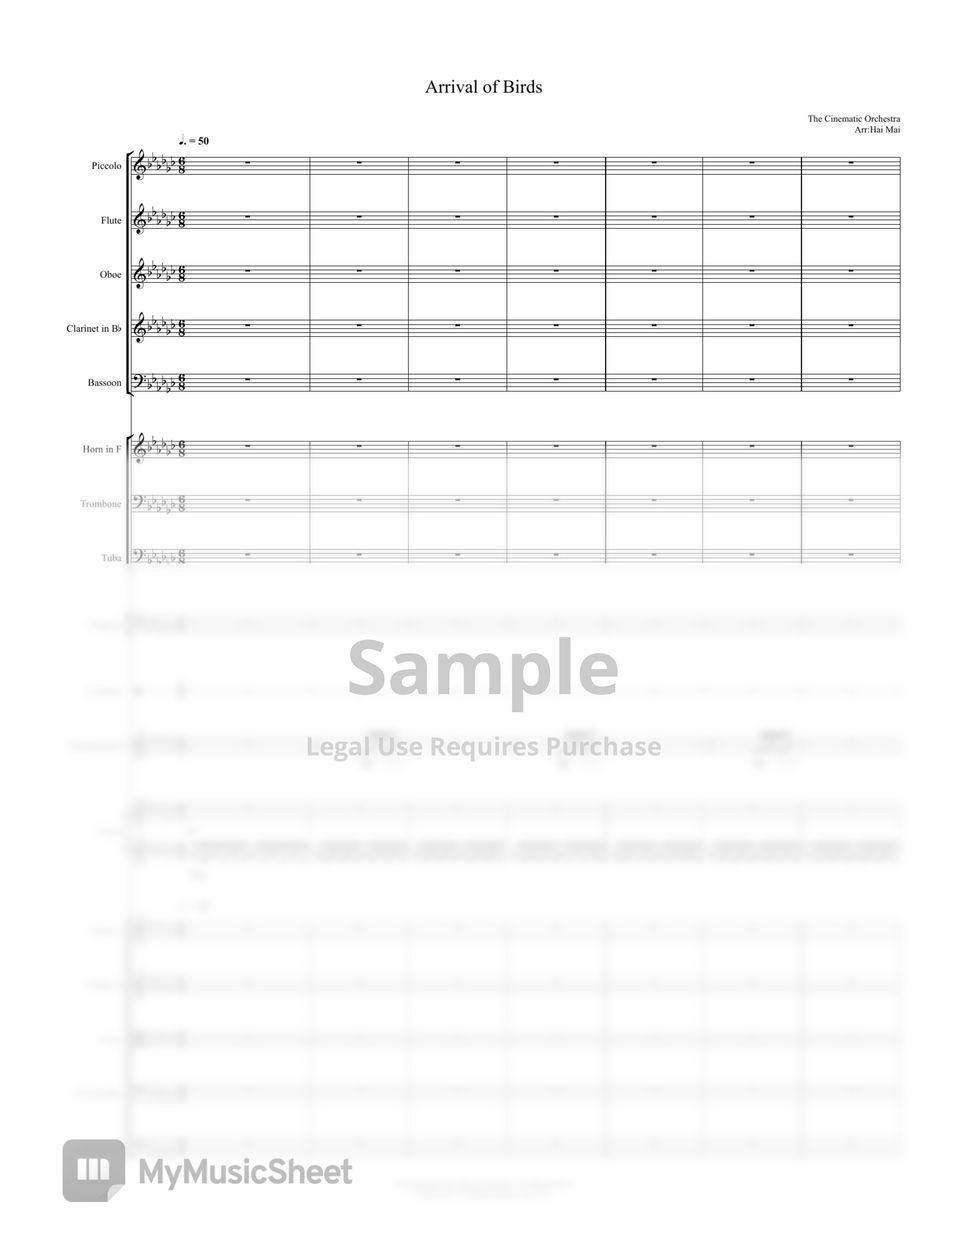 The Cinematic Orchestra - Arrival of Birds for Orchestra - Score and Part by Hai Mai